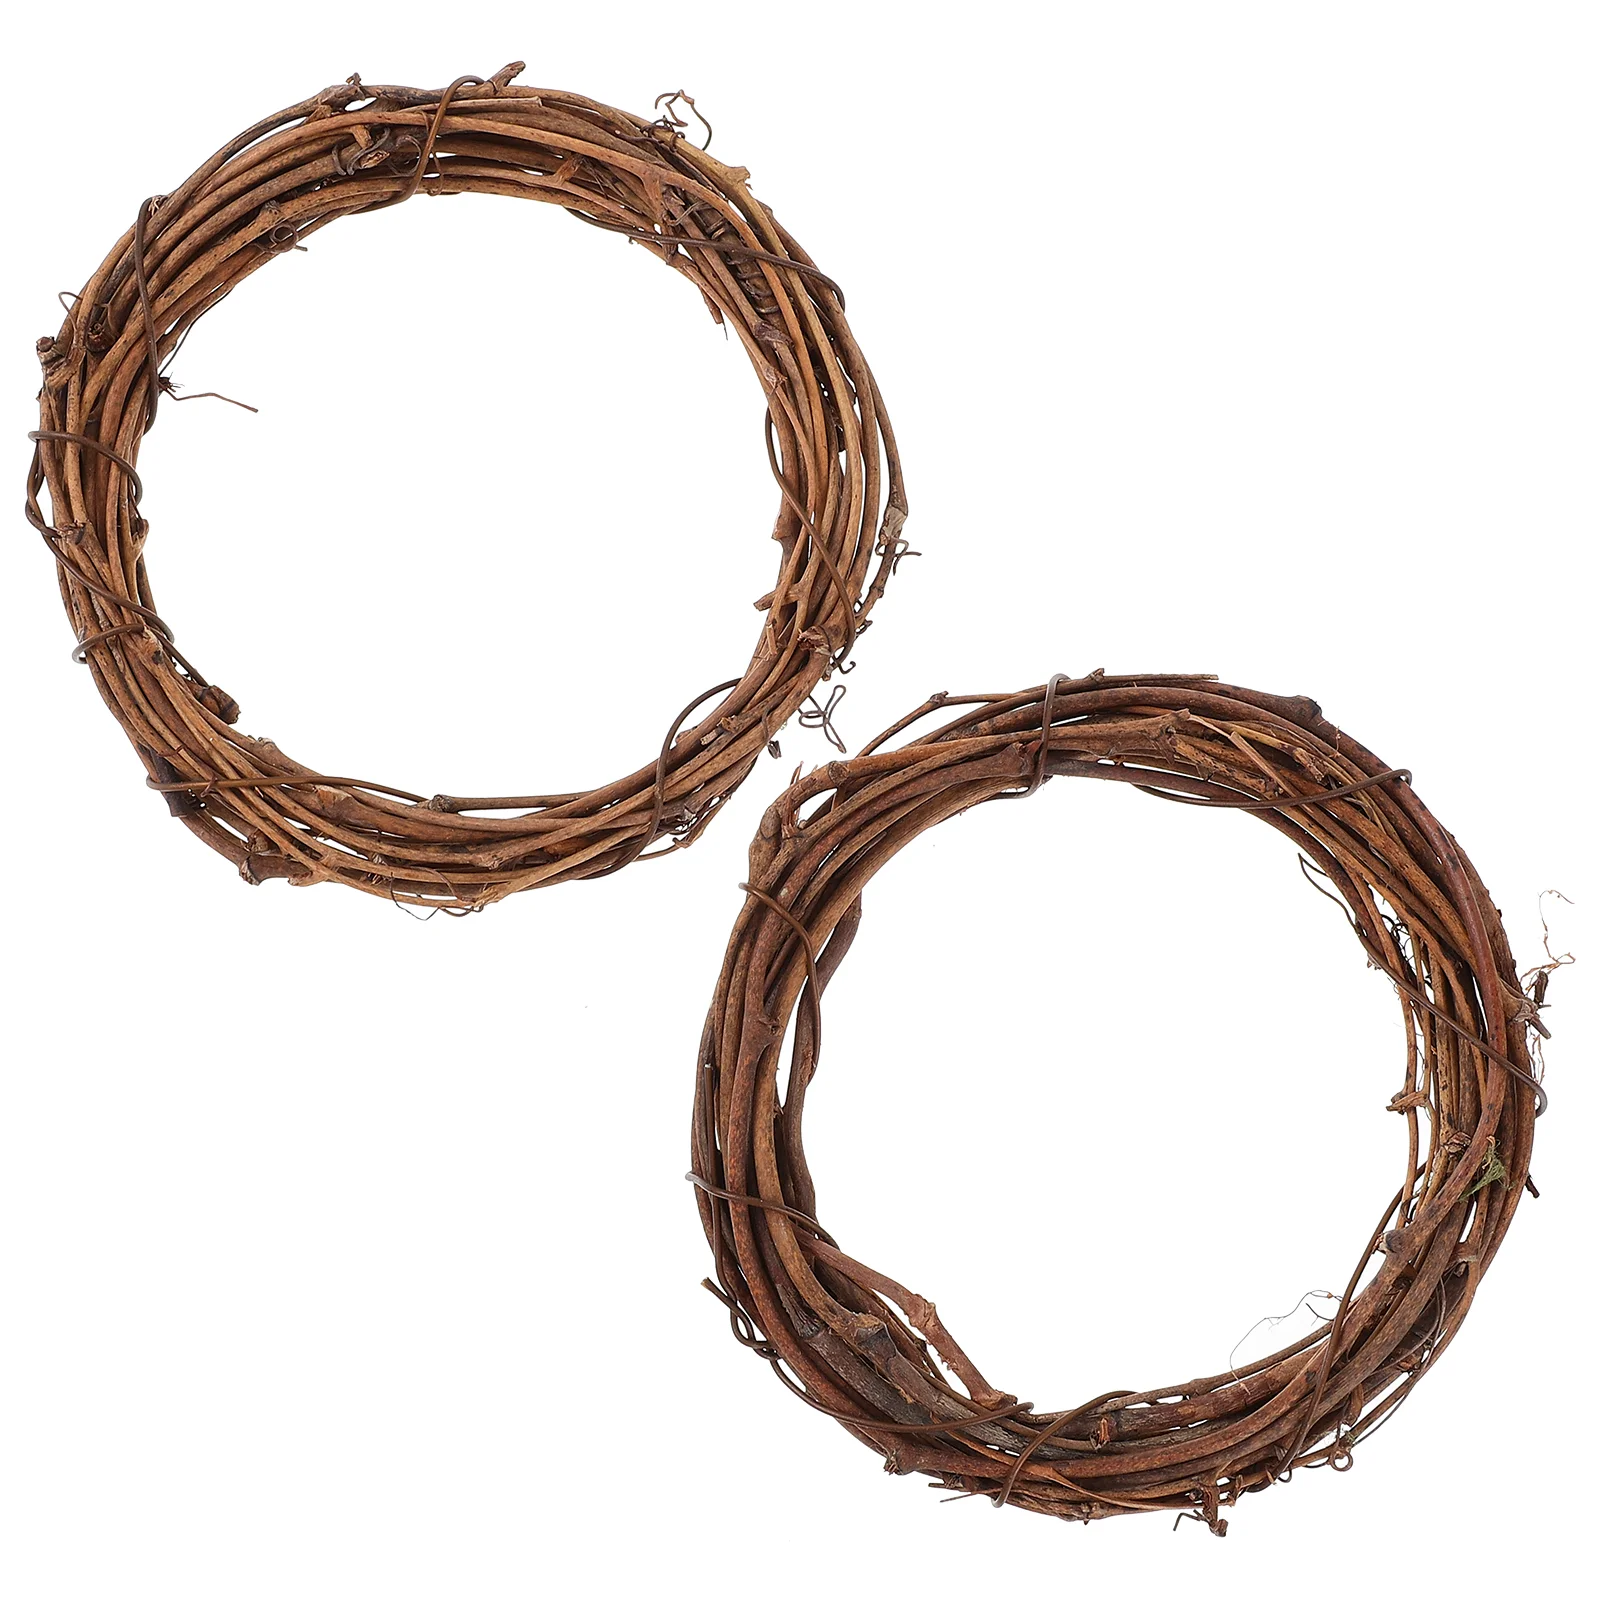 

Natural Grapevine Wreath Rings Rattan Vine Branch Door Wreath Hoop Floral Wreath Frame Diy Holiday Party Decorations Wedding